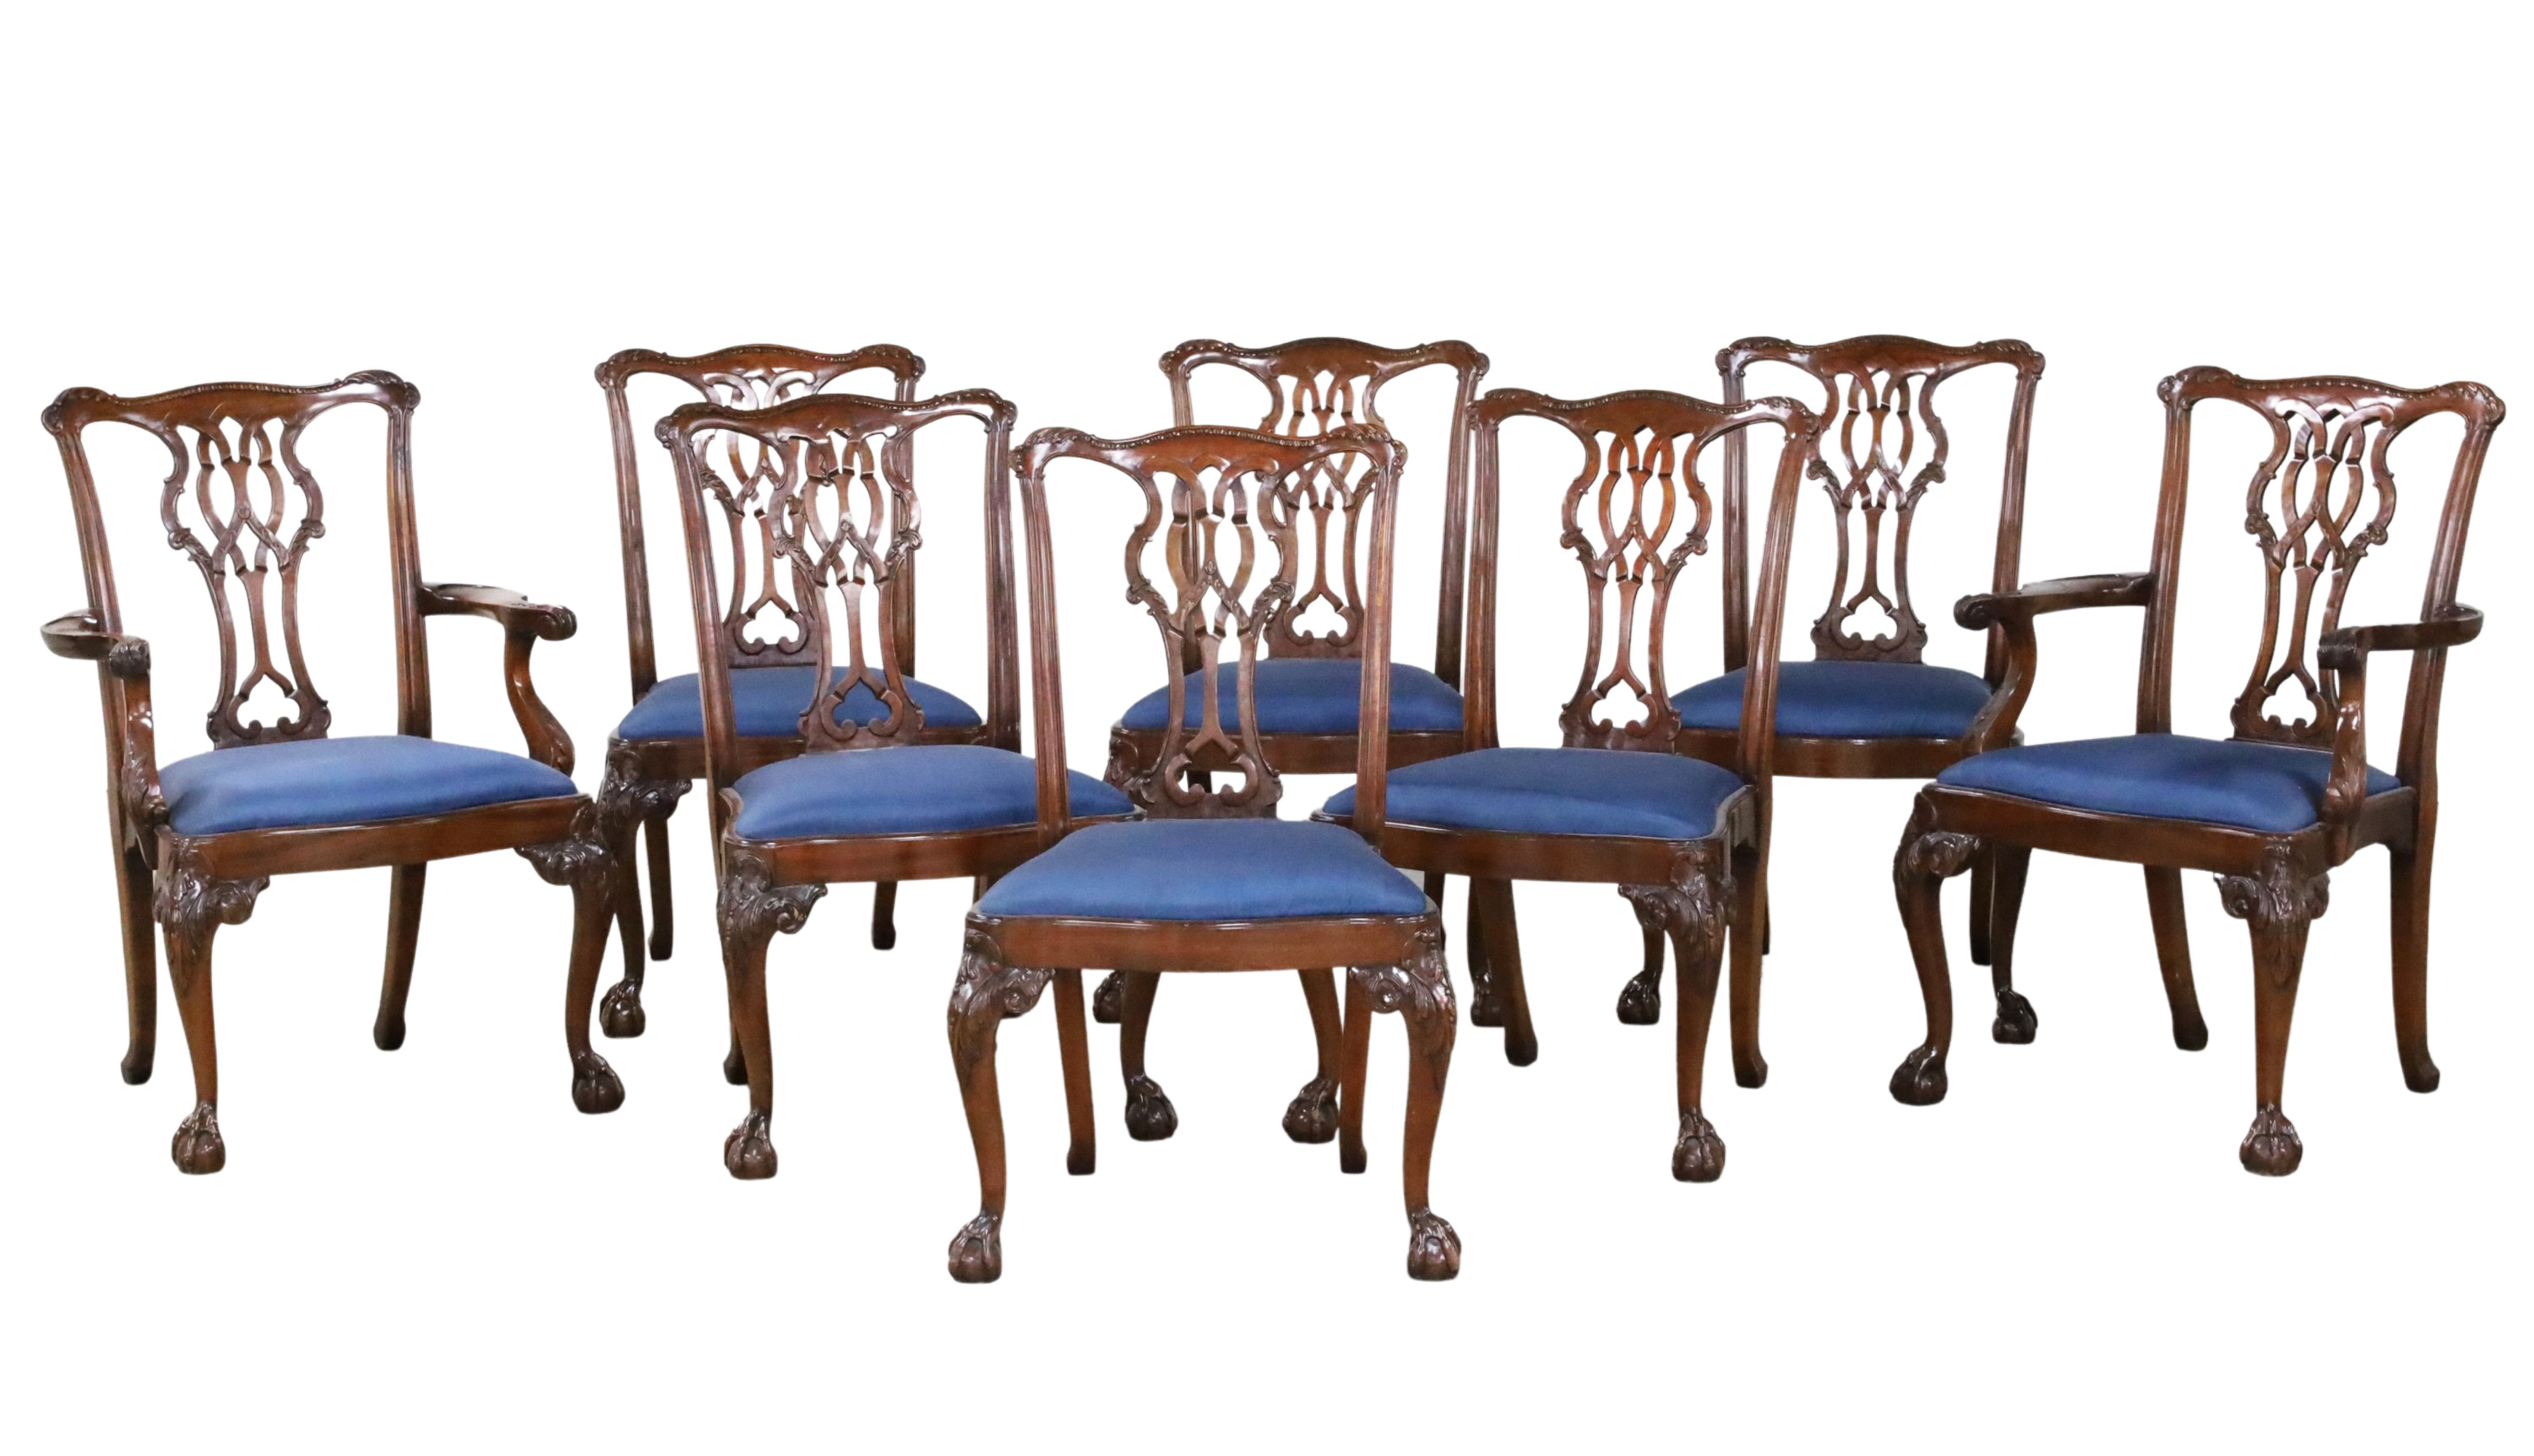 SET OF 8 CHIPPENDALE STYLE DINING 2f8c7f